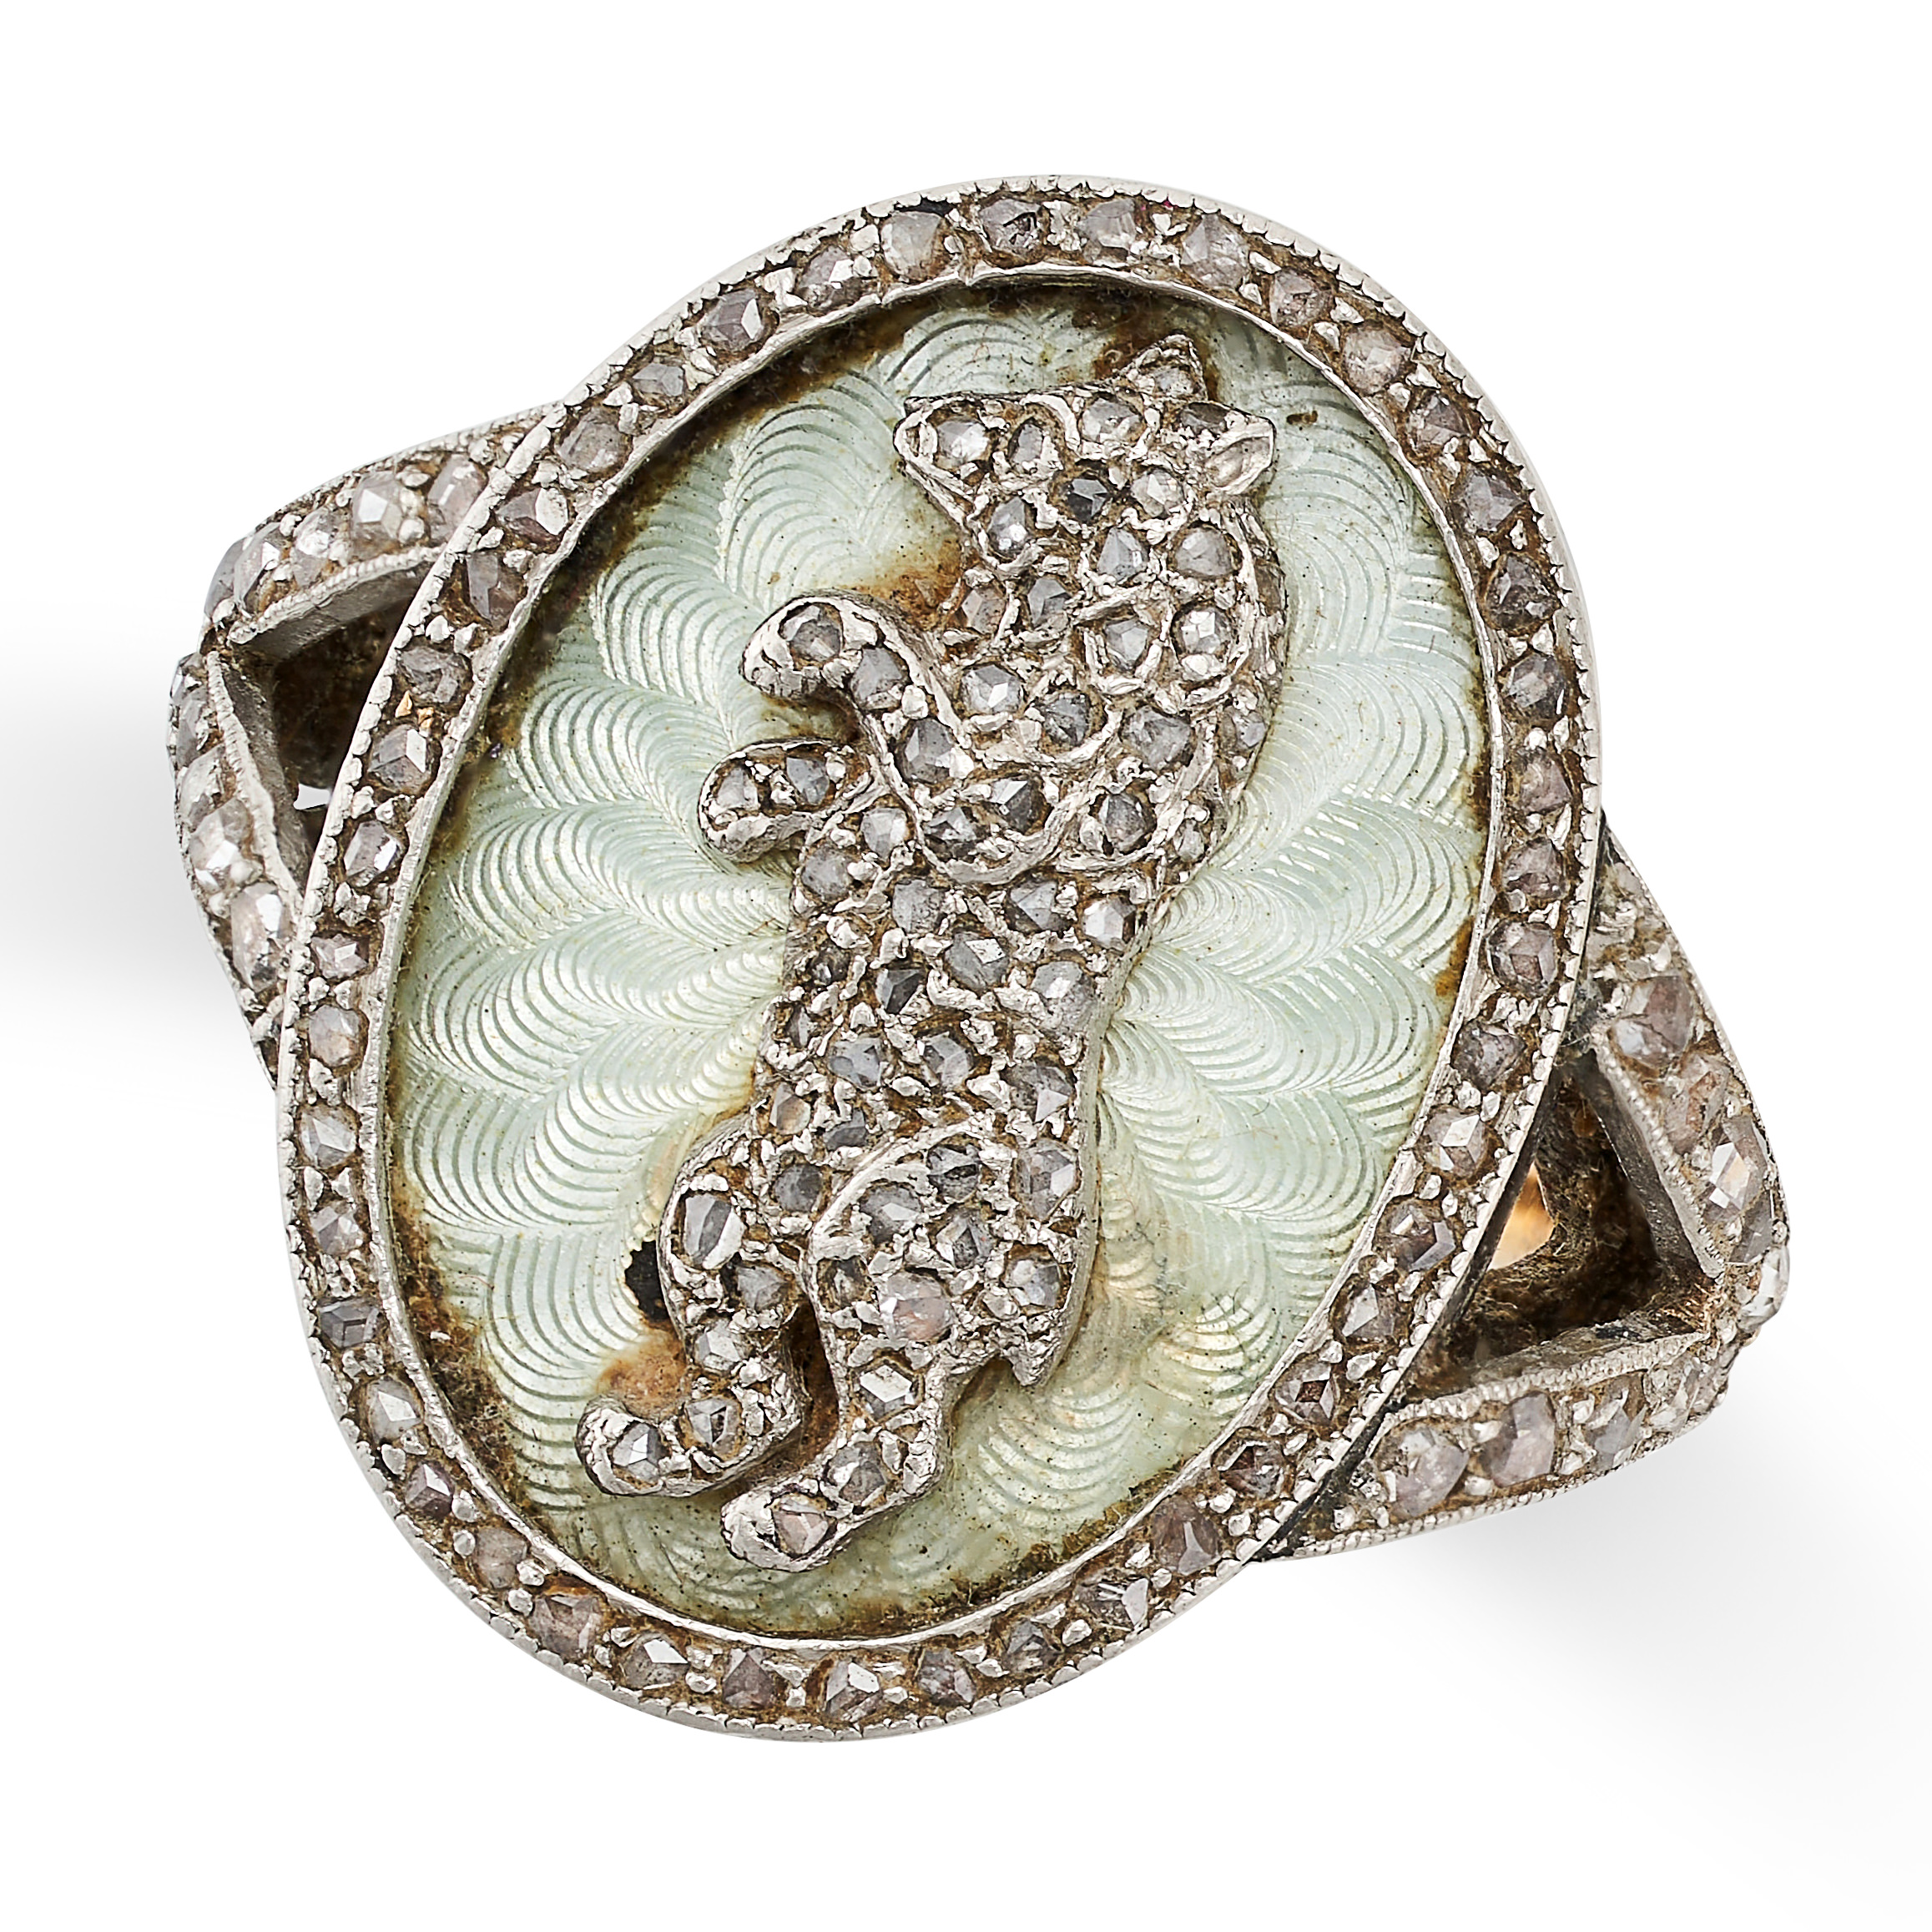 AN ANTIQUE ENAMEL AND DIAMOND BEAR RING in 18ct yellow gold and platinum, the oval face with an